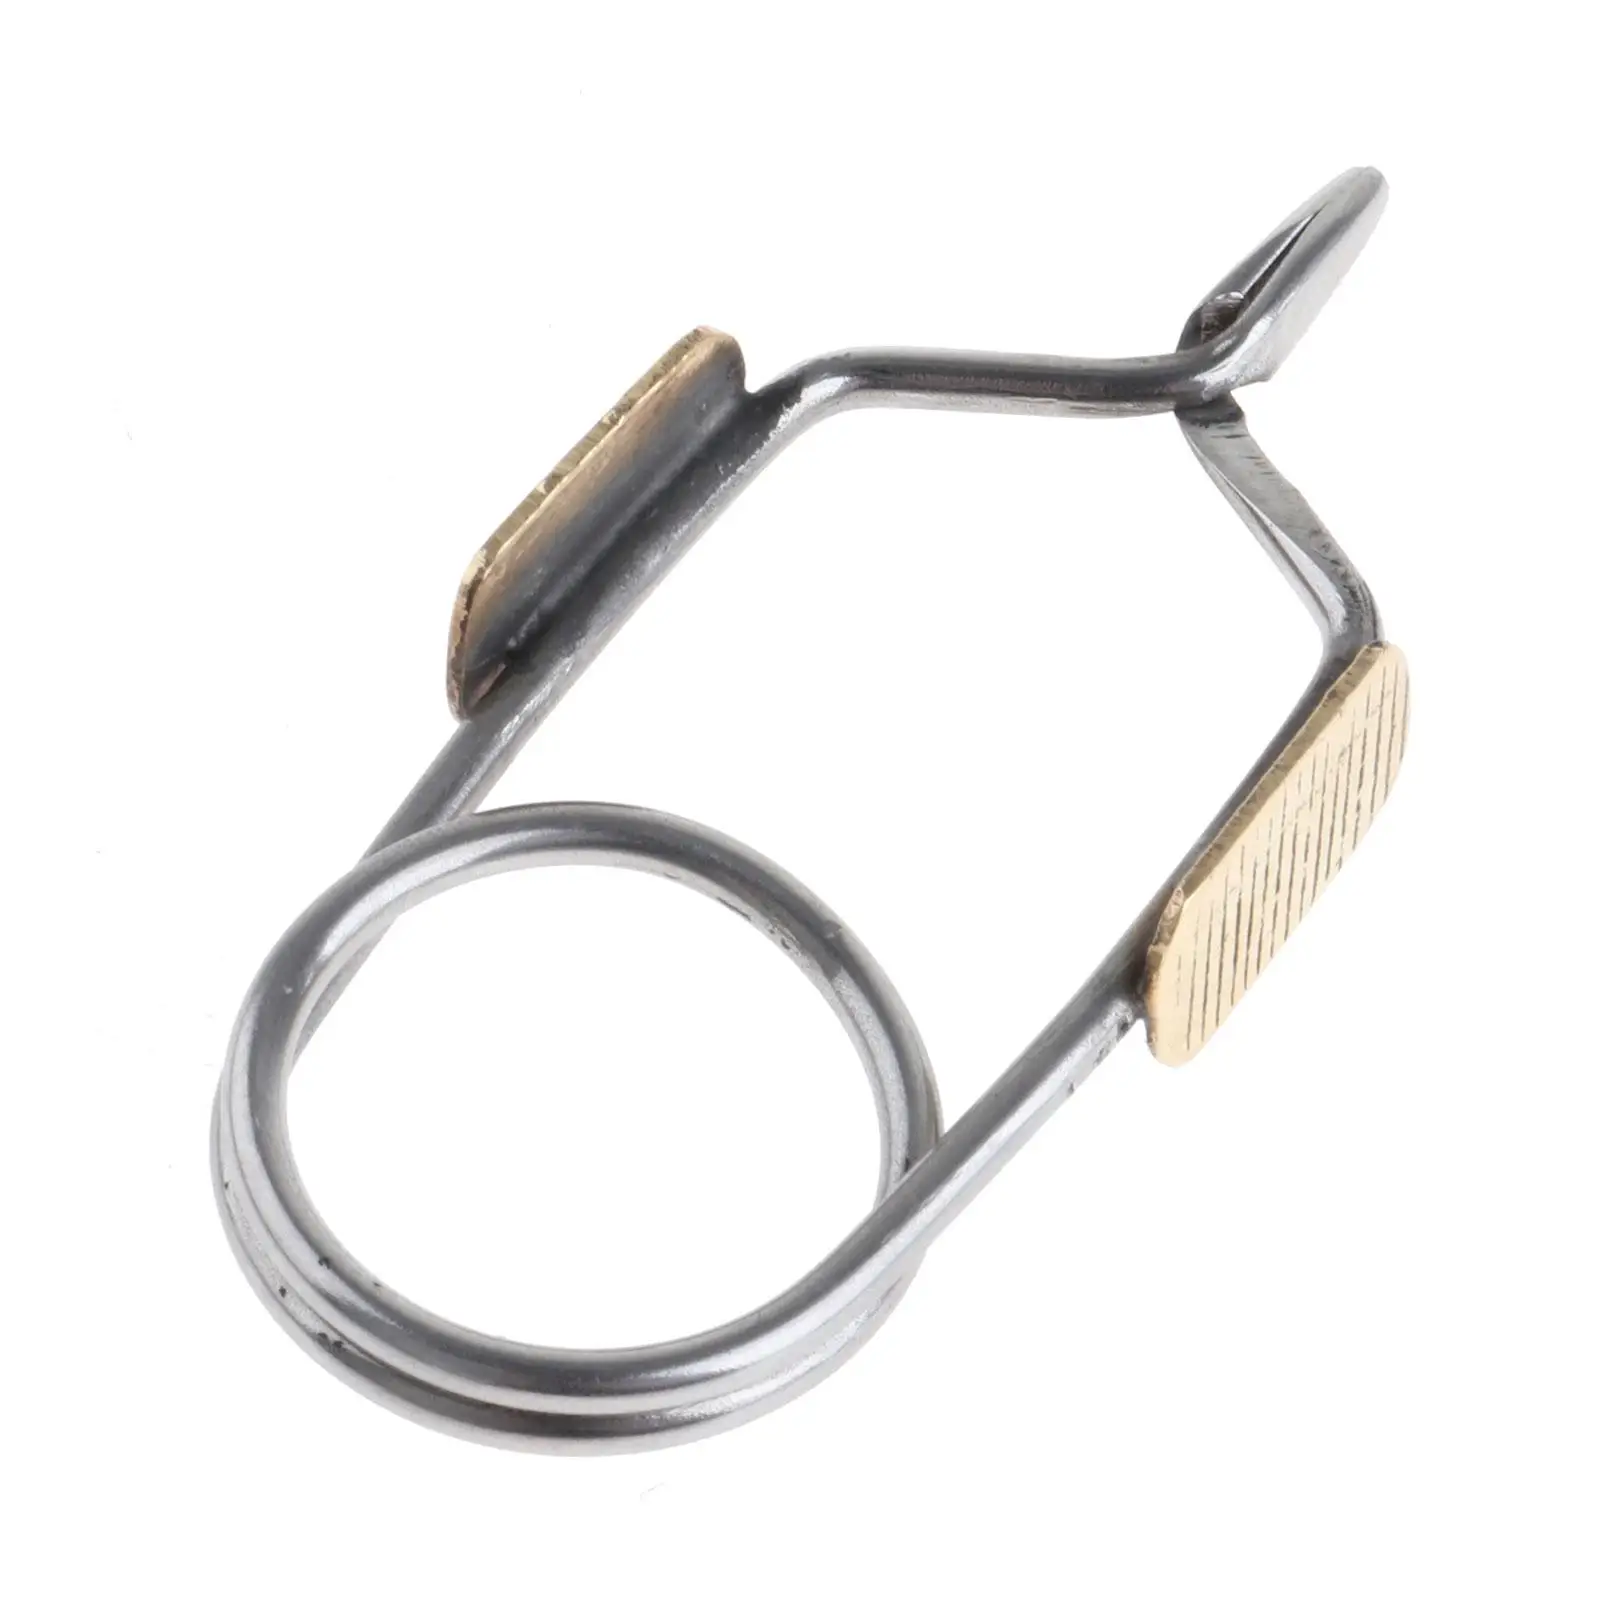 Hackle Pliers for Tying Flies Nonslip Fly Fishing Gear for Fly Tying Device